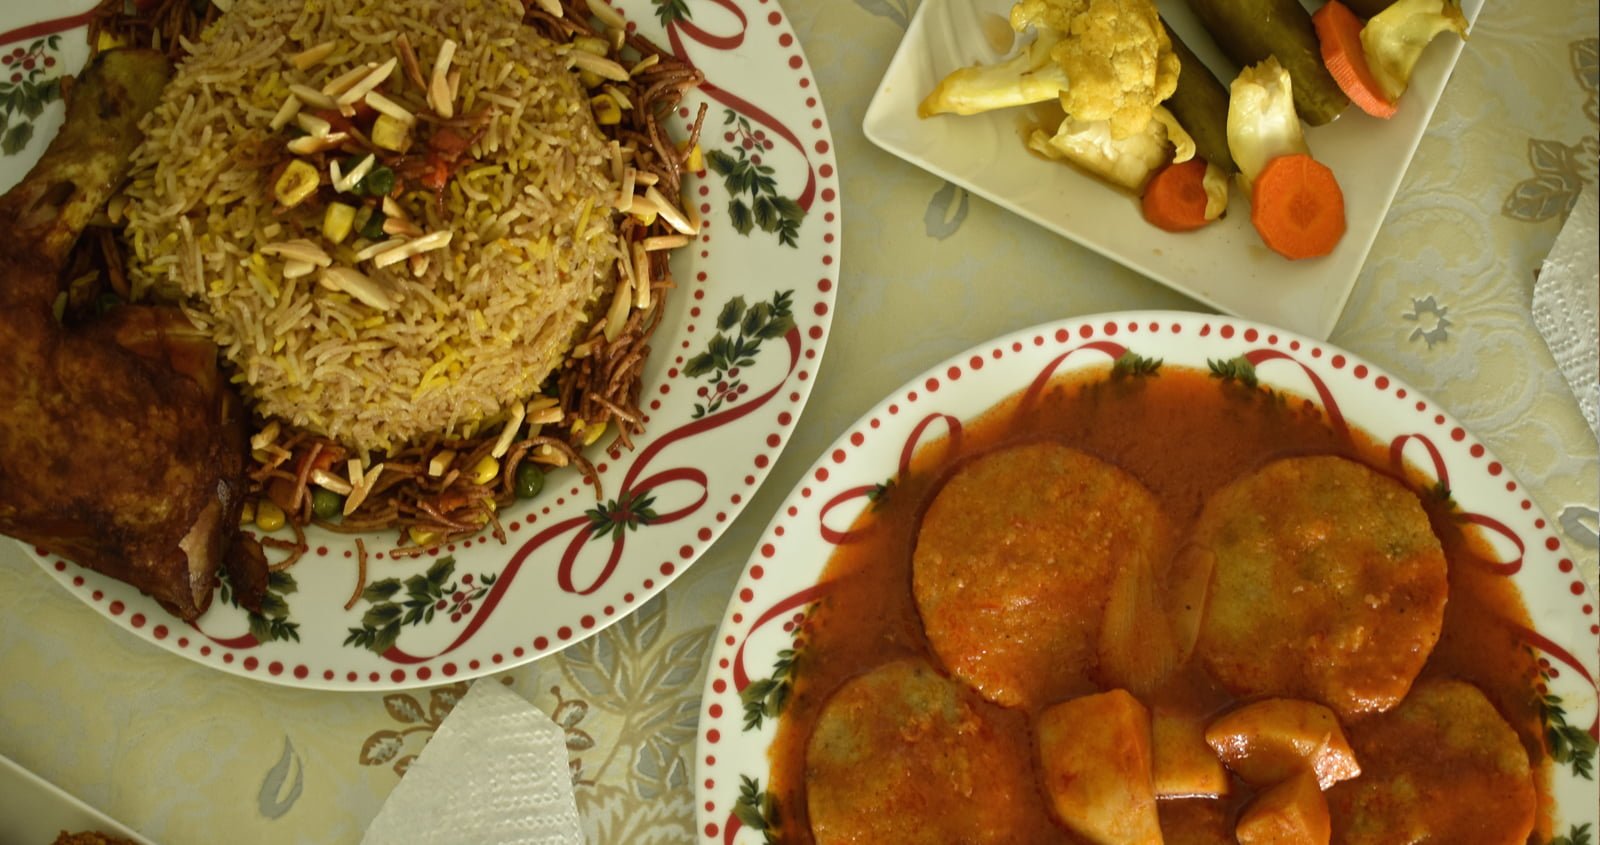 A plate of Biryani with side dishes of vegetables